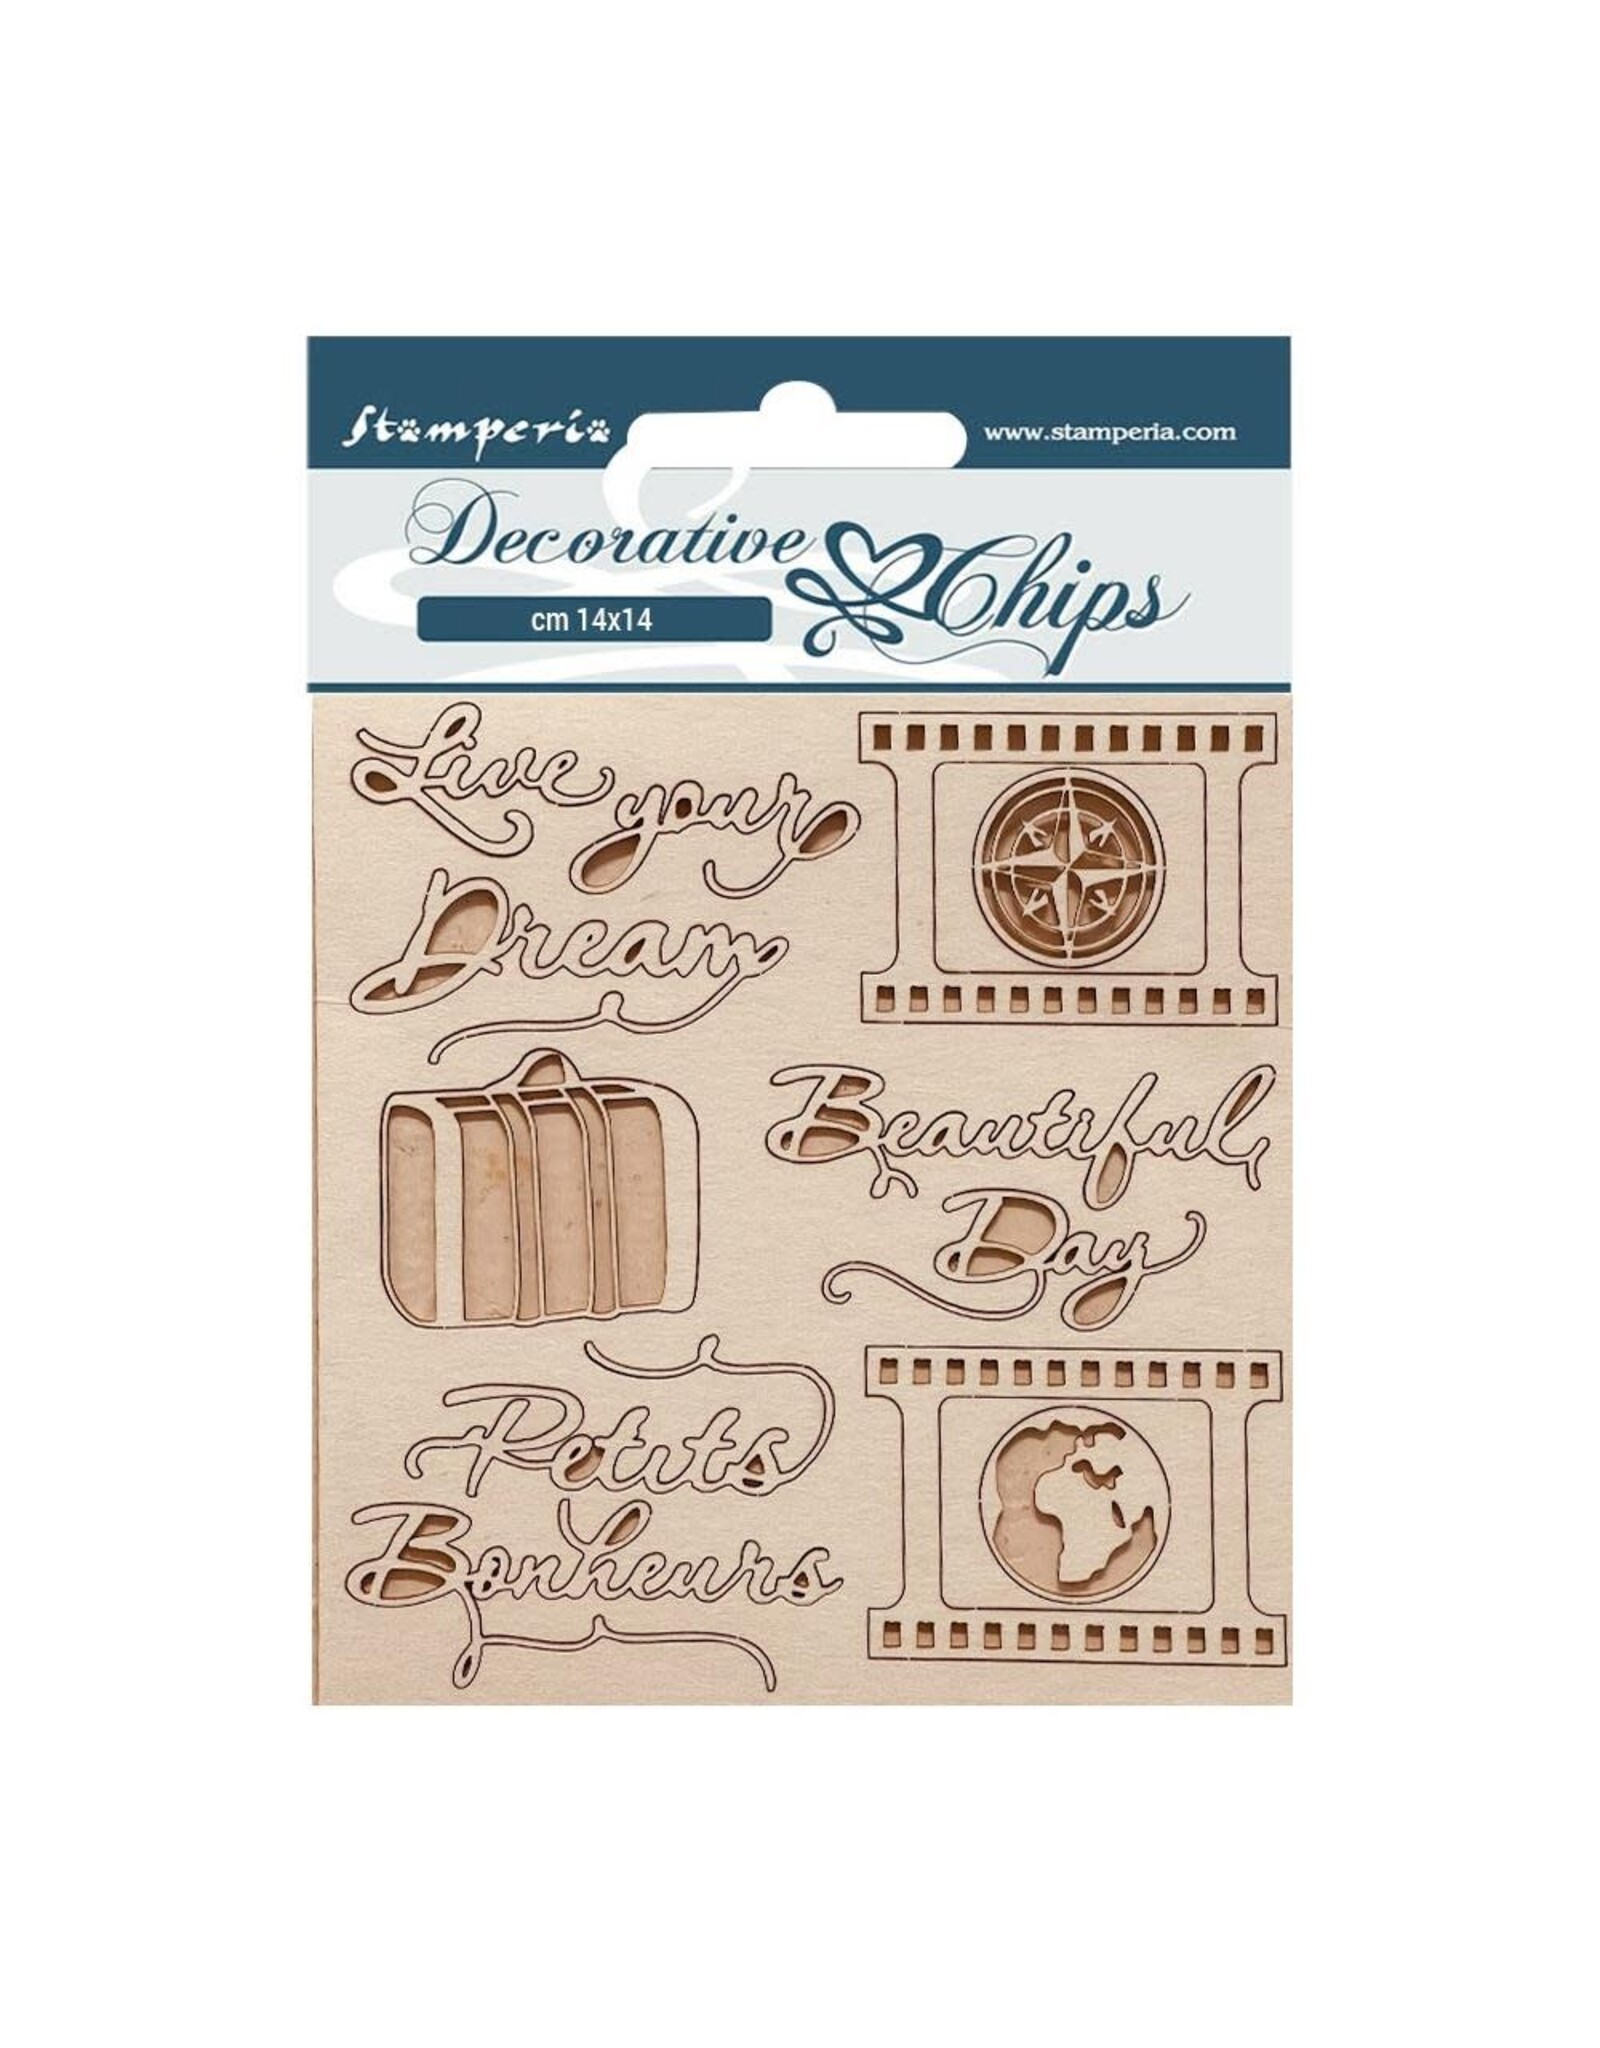 STAMPERIA STAMPERIA VICKY PAPAIOANNOU CREATE HAPPINESS OH LA LA! LIVE YOUR DREAM 5.5x5.5 LARGE DECORATIVE CHIPS